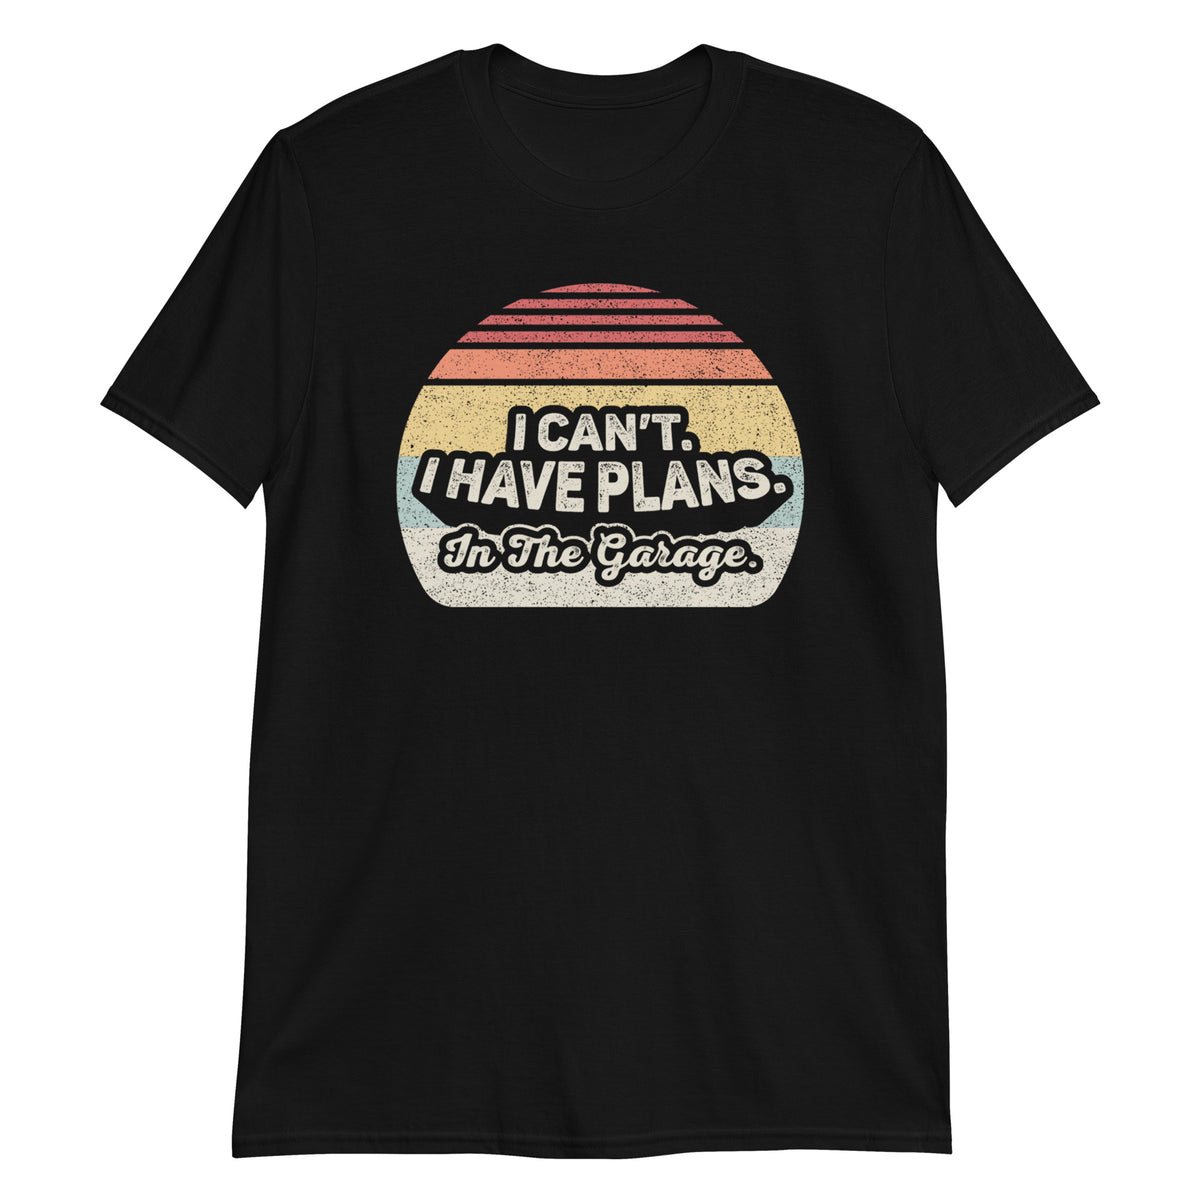 I Can't I Have Plans in The Garage T-Shirt